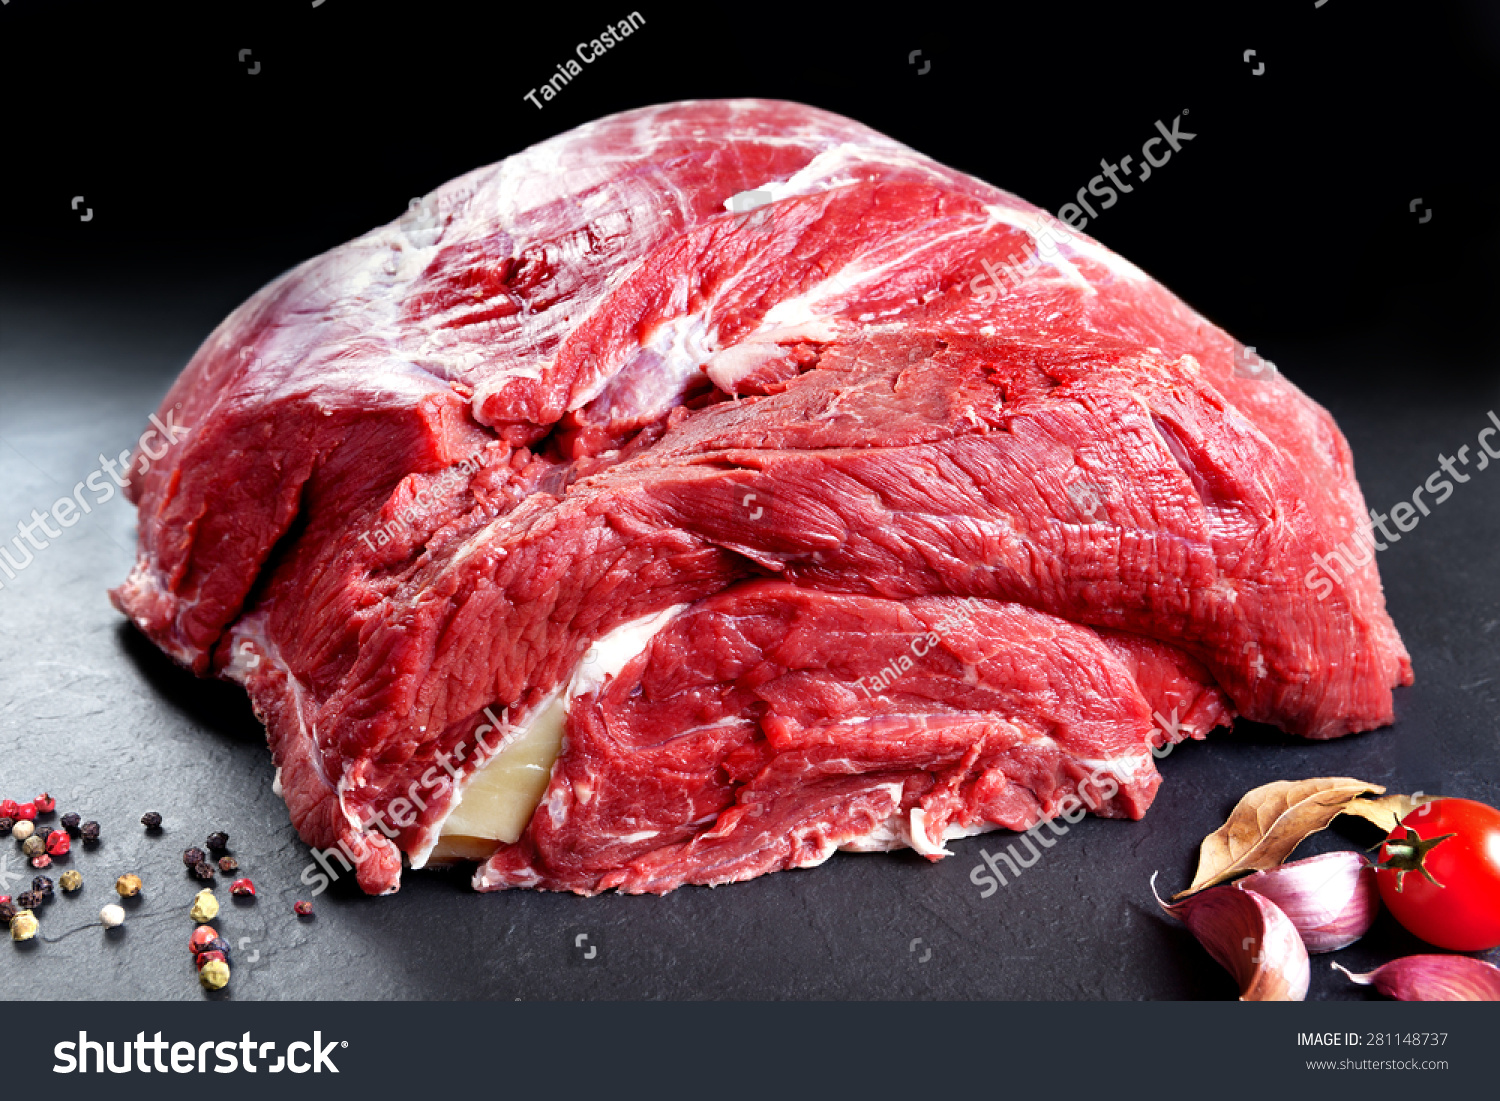 Fresh and raw meat. Whole piece of red meat ready to cook on the grill or BBQ .Background black blackboard #281148737